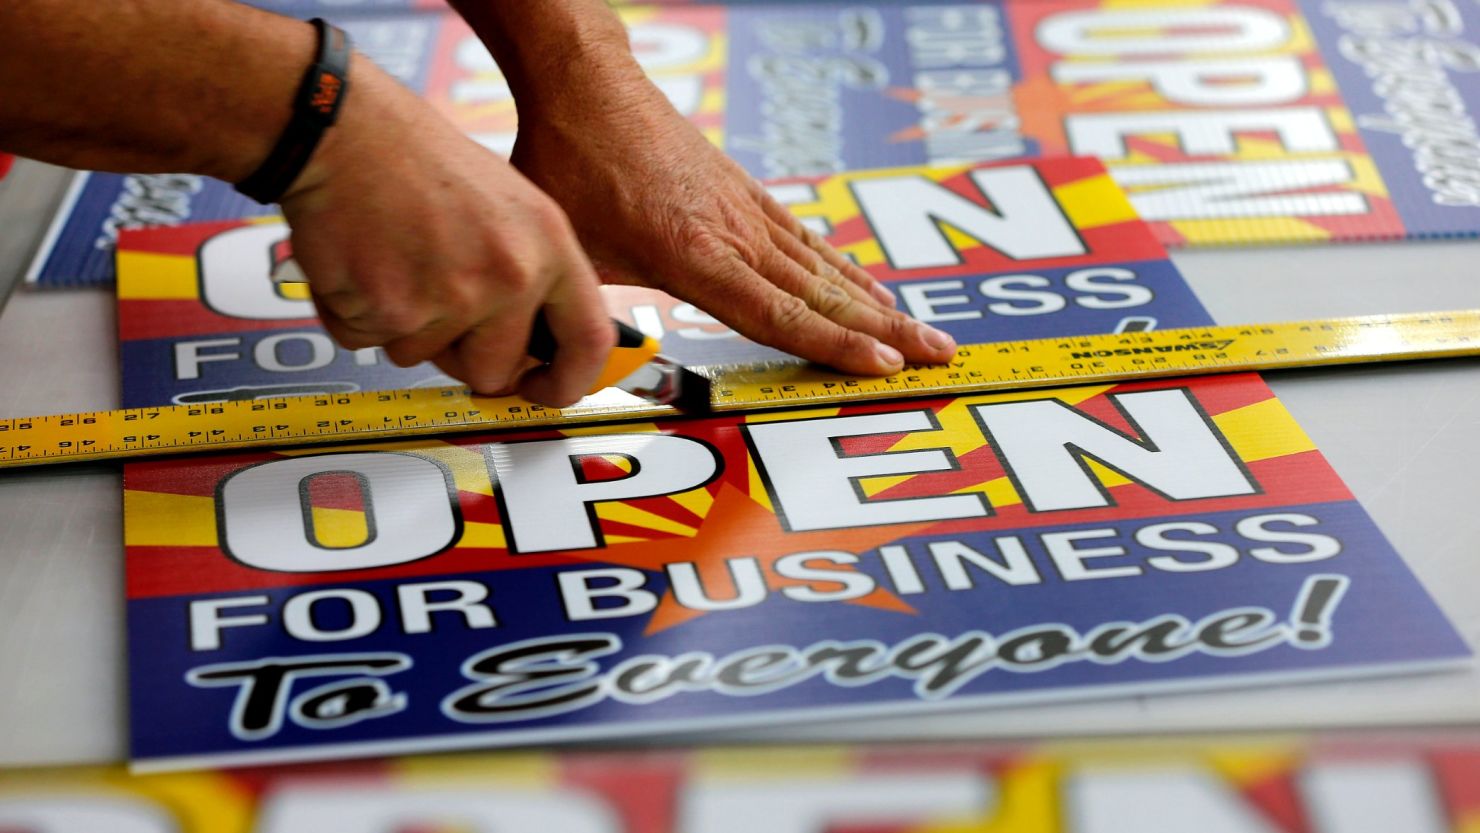 Tom Cushing, a production expert at Fast Signs in Phoenix, Arizona, cuts down a sheet of anti-Senate Bill 1062 signs that read "Open For Business To Everyone" on Wednesday before Gov. Jan Brewer vetoed the controversial measure.